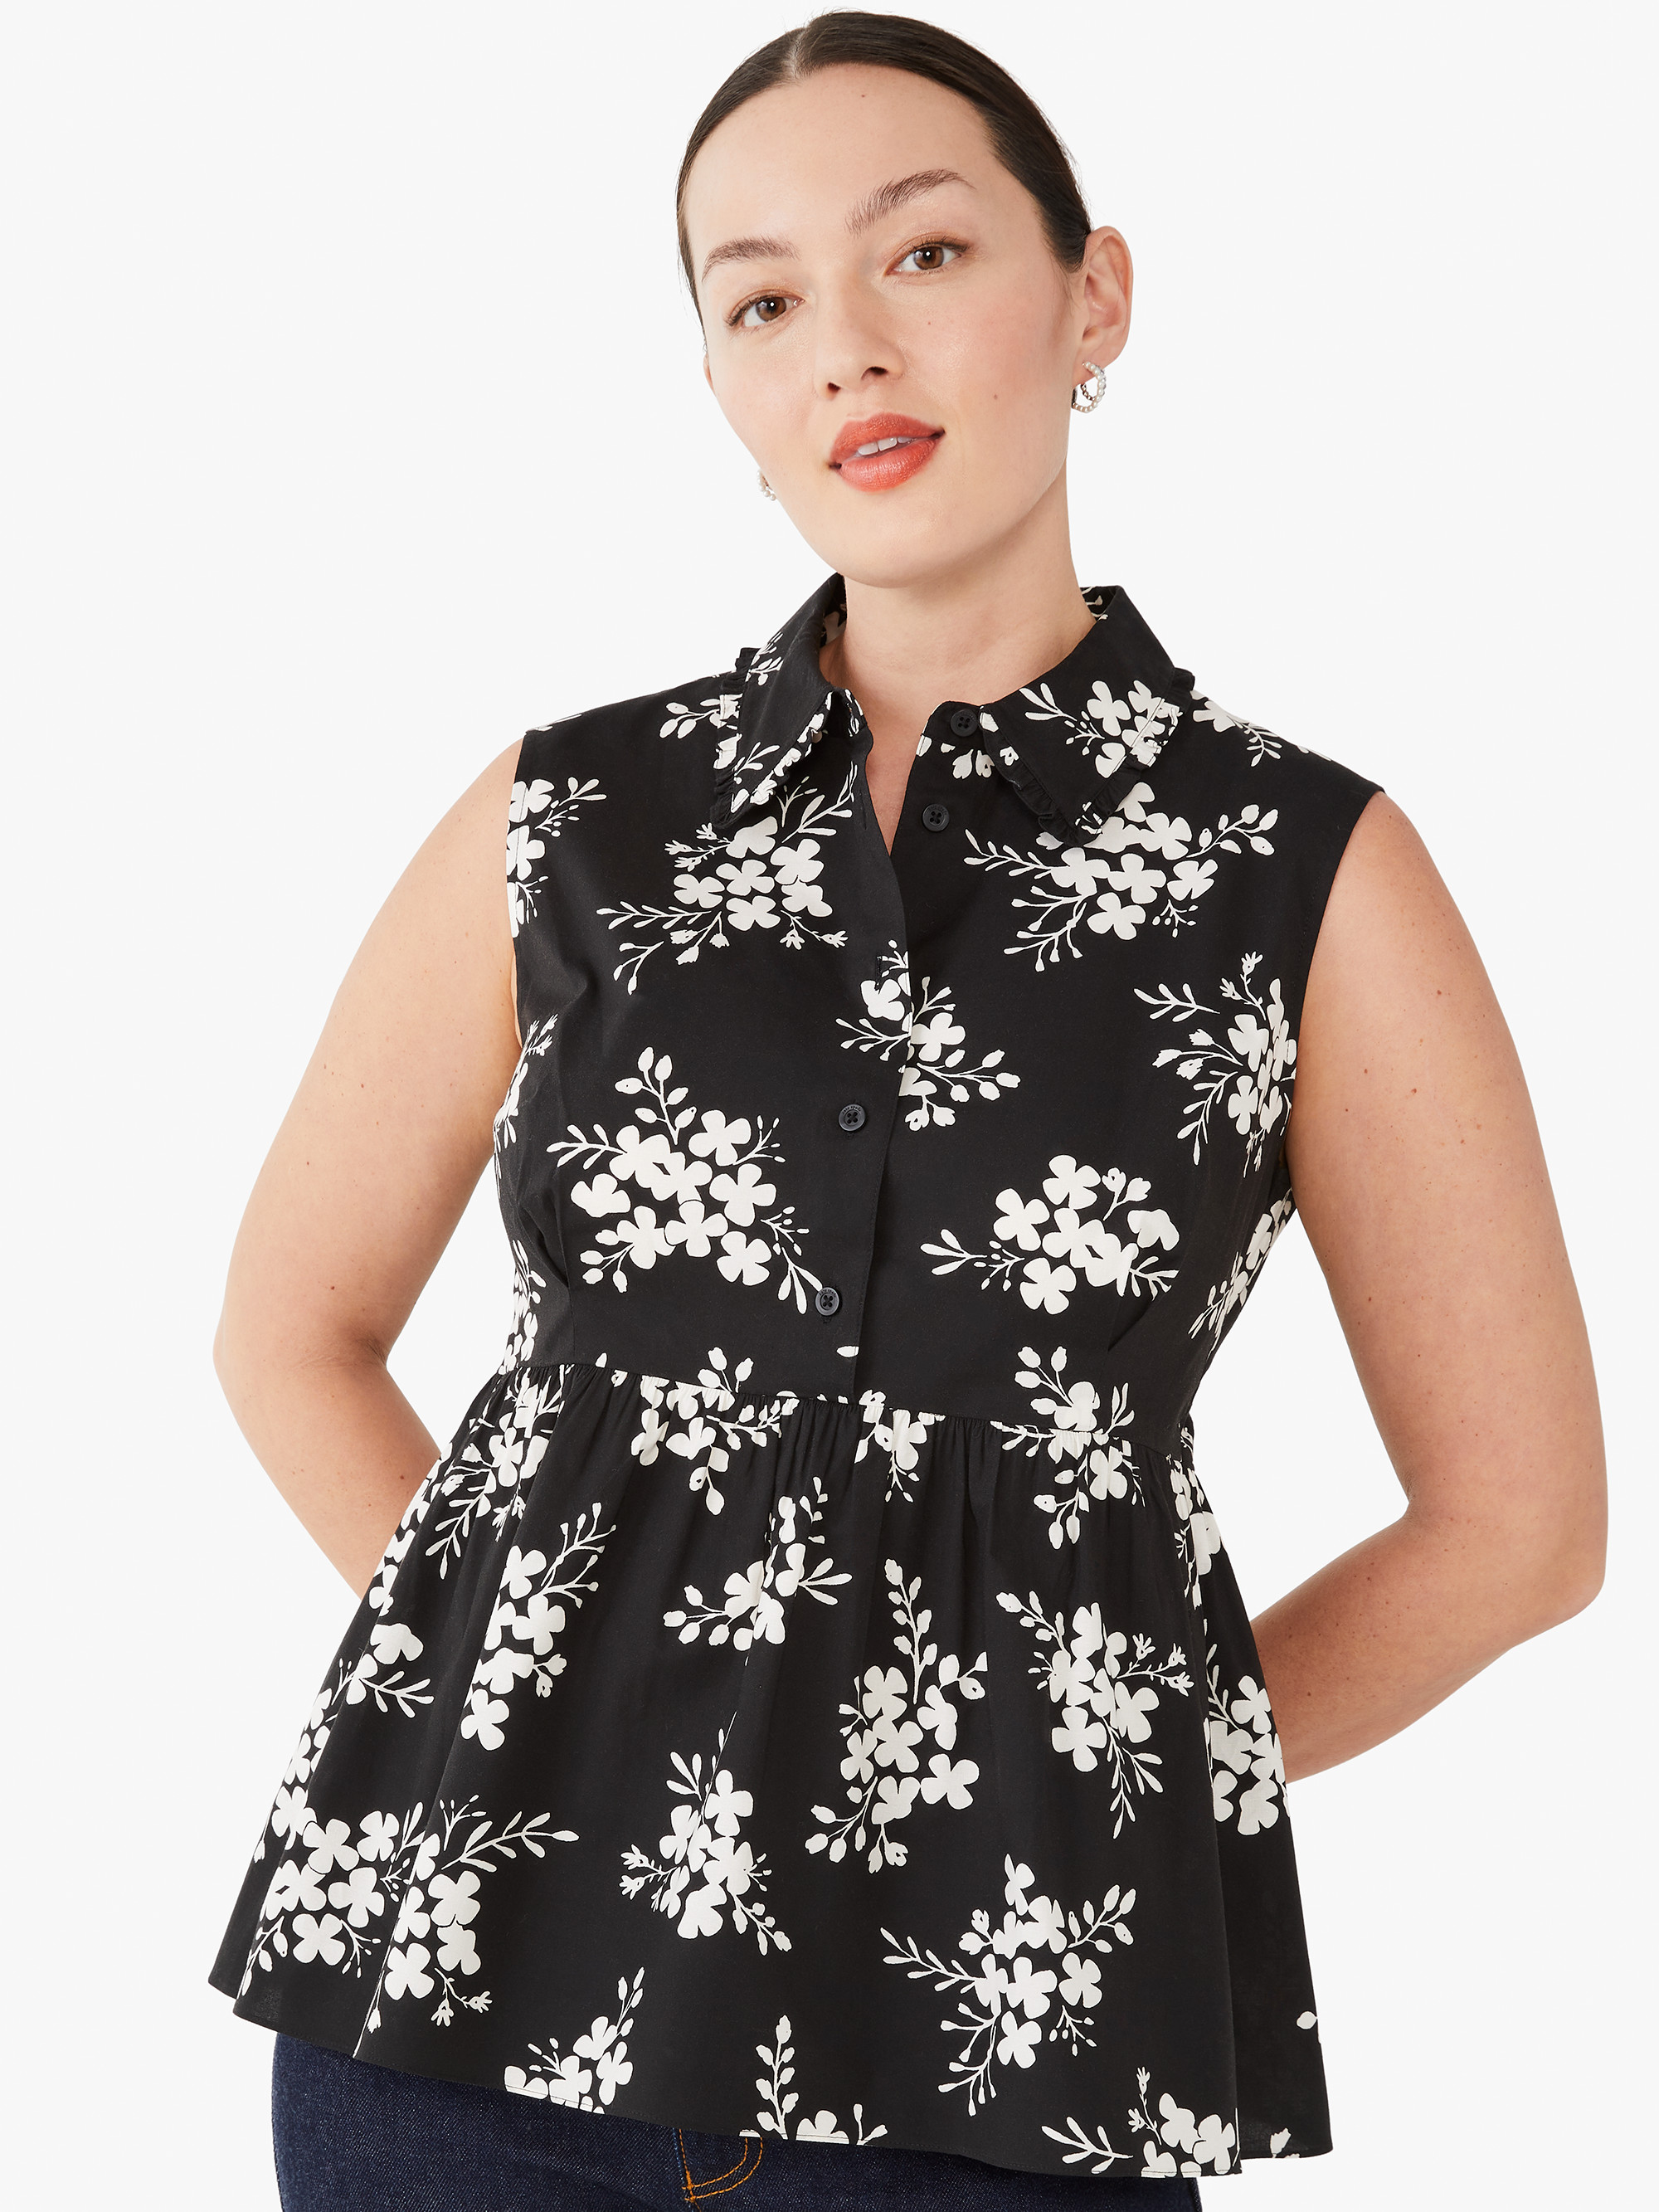 Floral Clusters Flounce Top